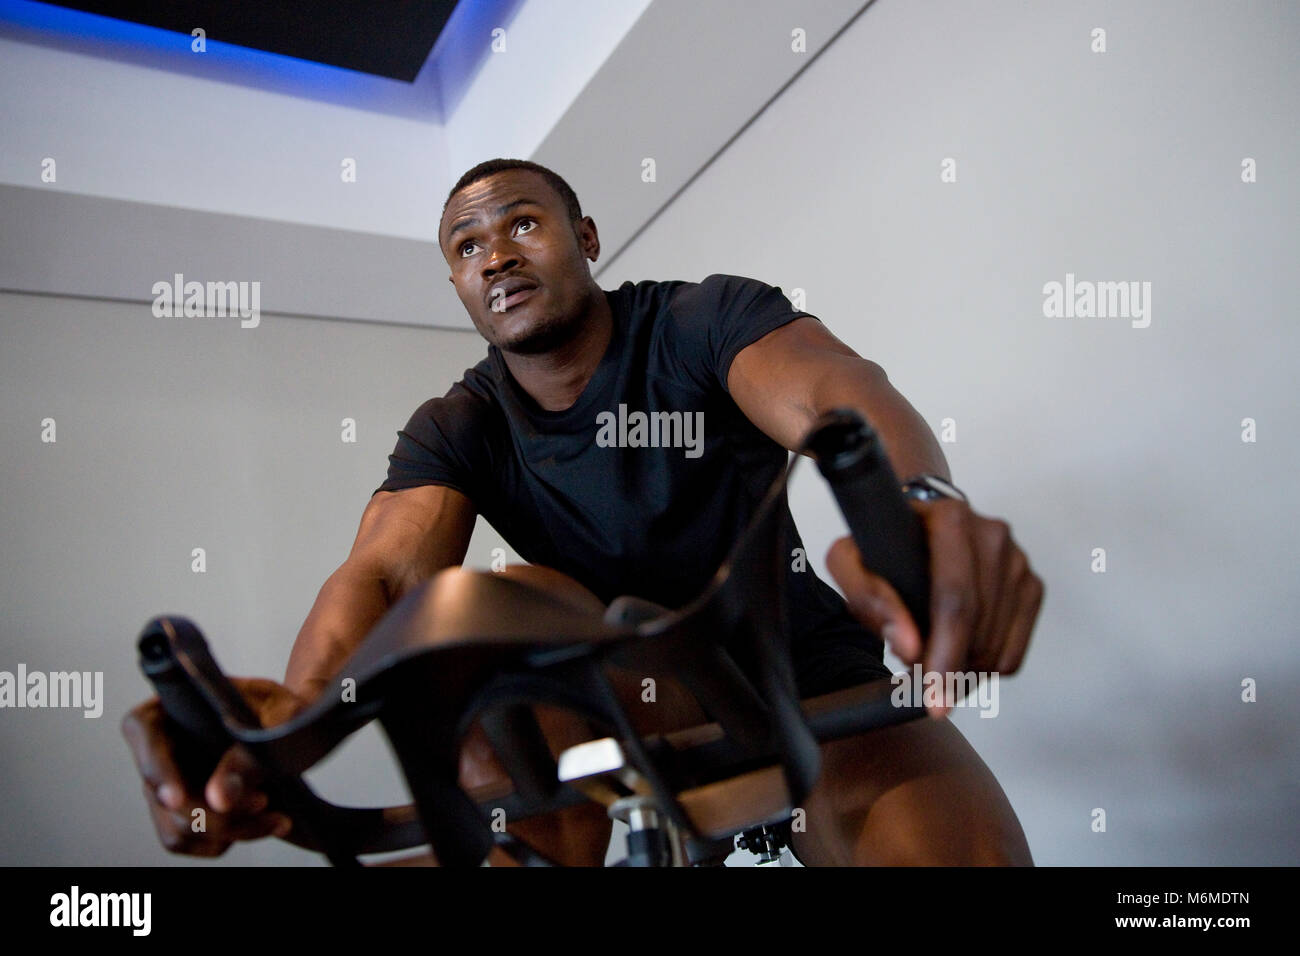 African man exercising on stationary bicycle Stock Photo